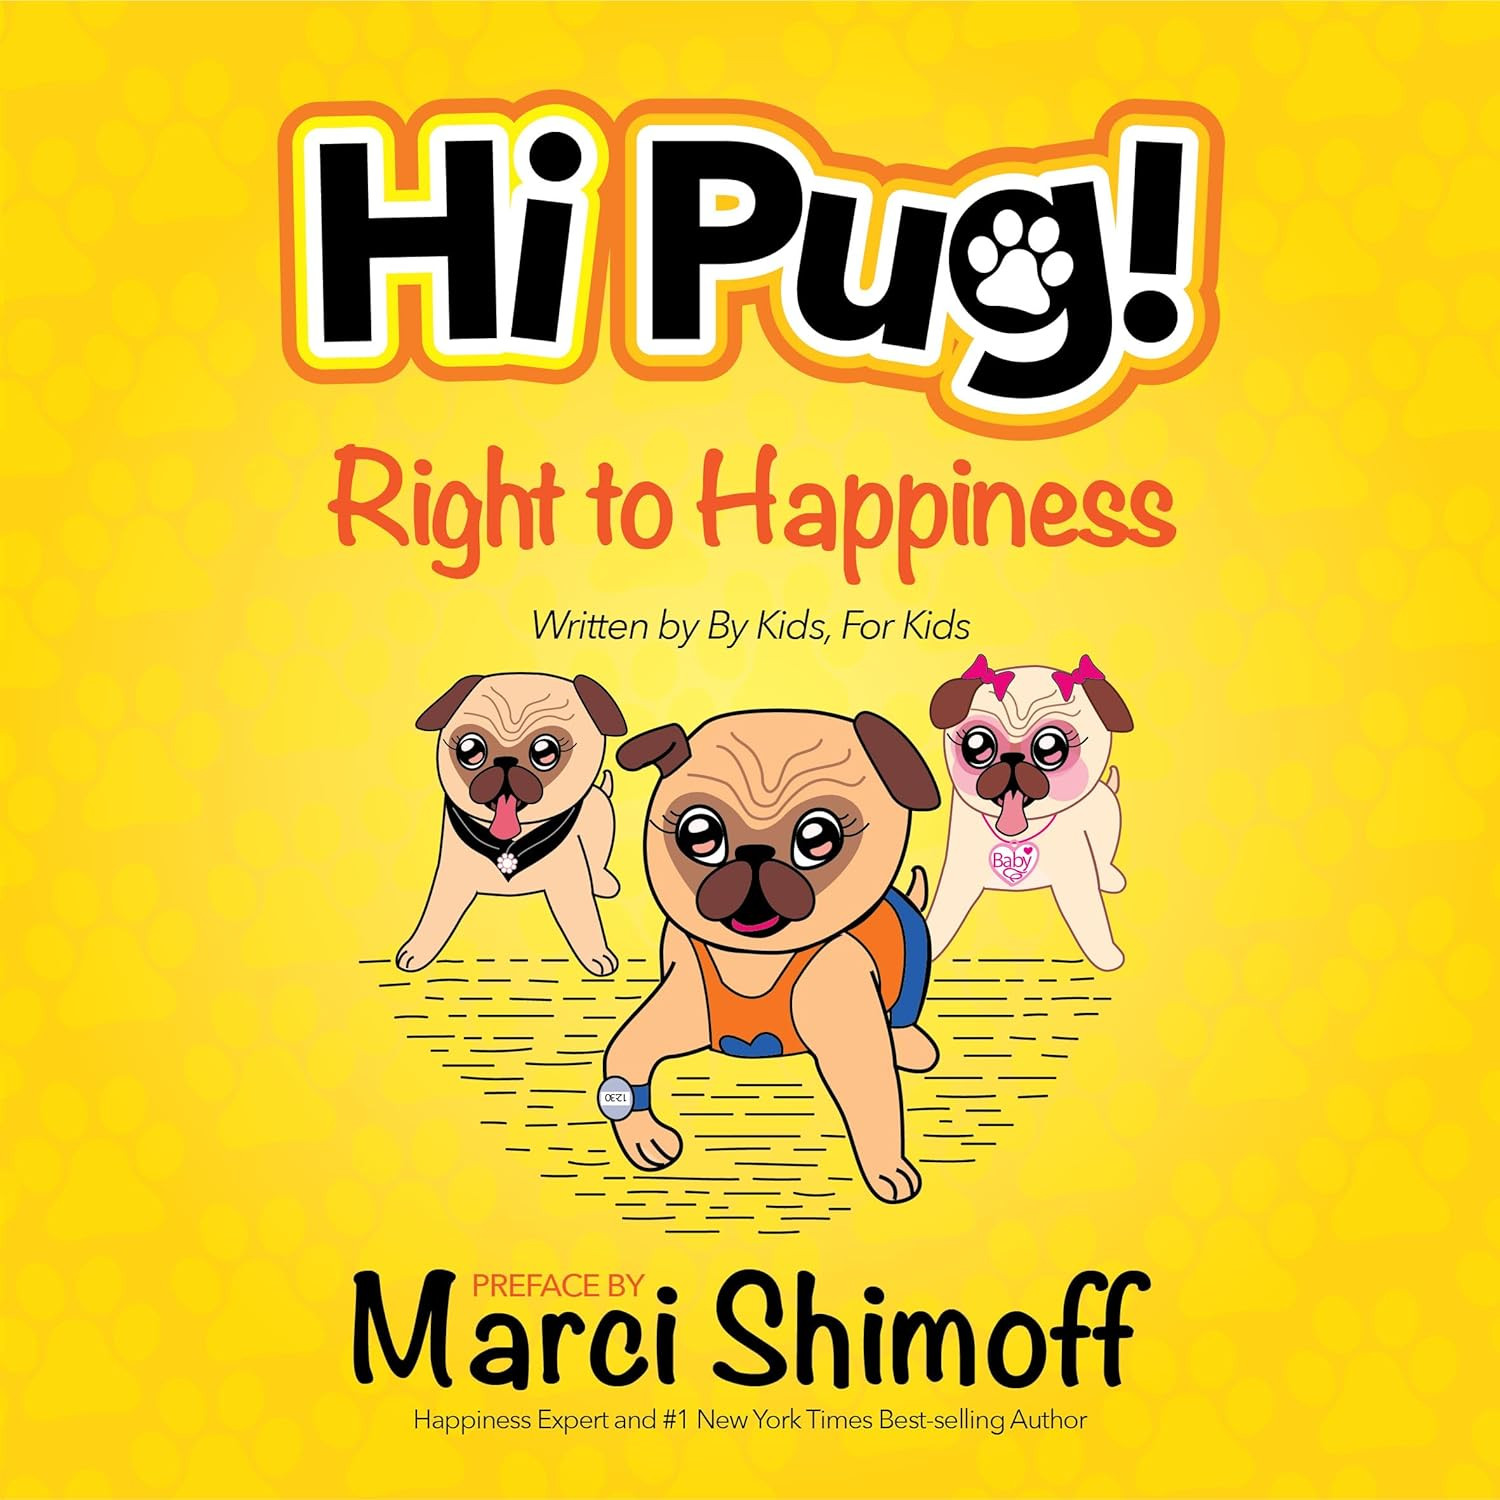 Hi Pug!: Right to Happiness